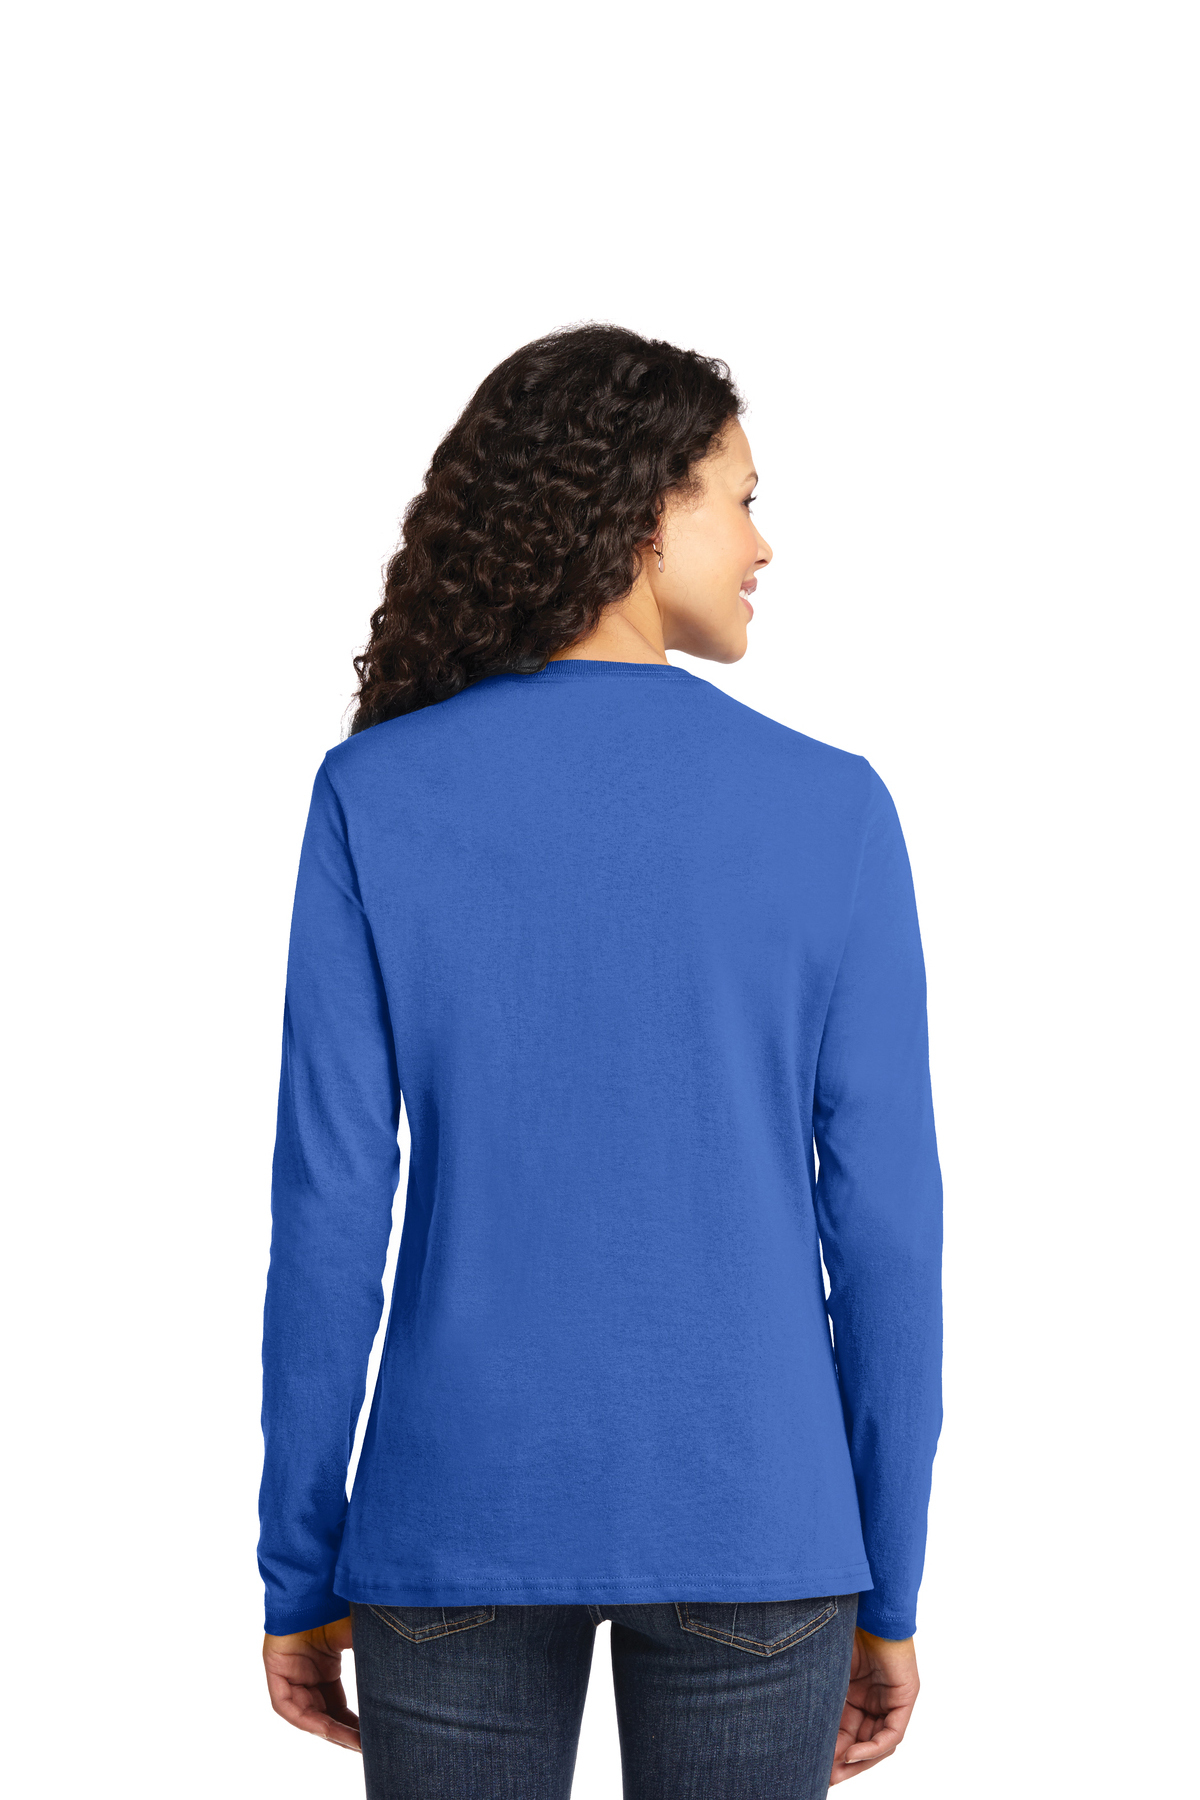 Port & Company Ladies Long Sleeve Core Cotton Tee – Brighter Image